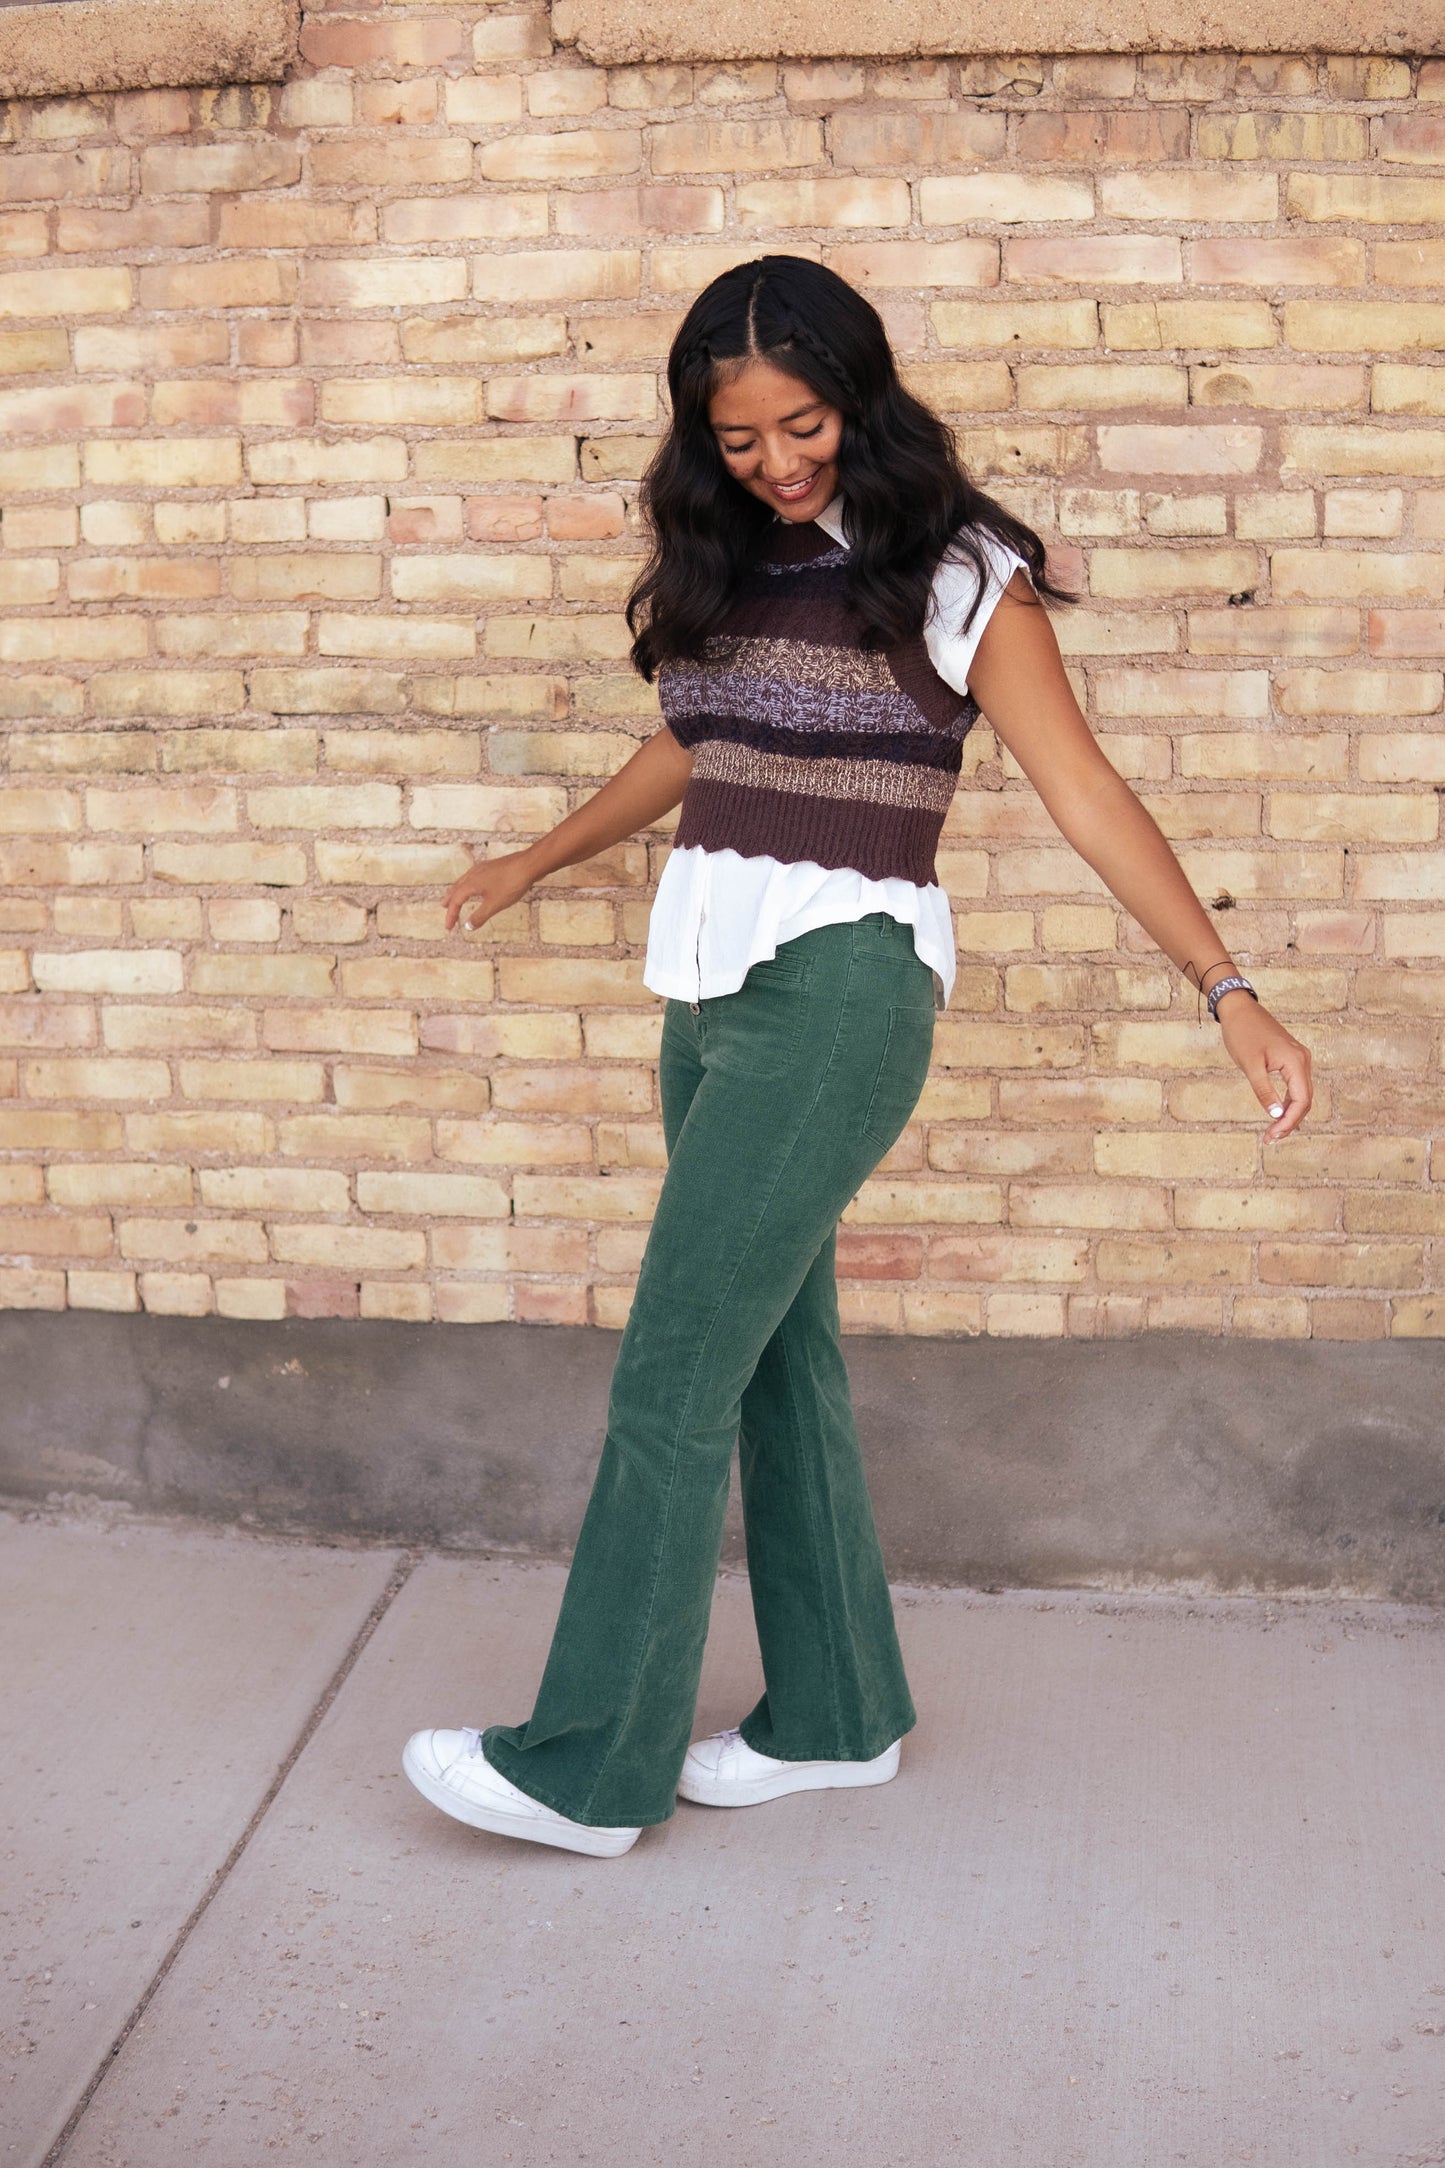 Corduroy Pants, Cords, Green pants, back to school clothes